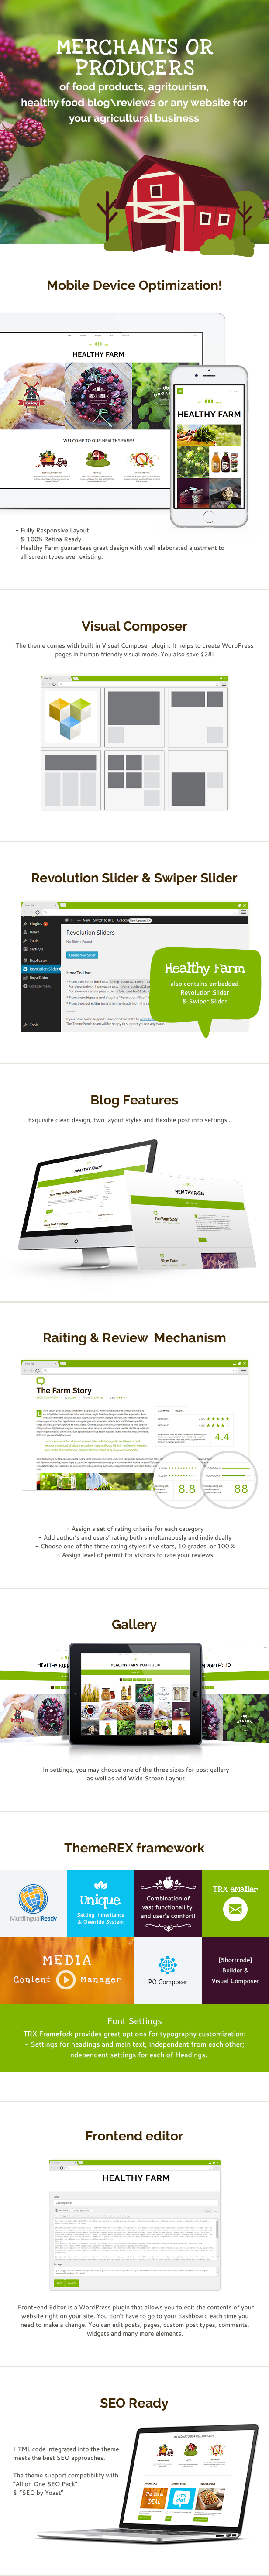 Healthy Farm - Food & Agriculture WordPress Theme features